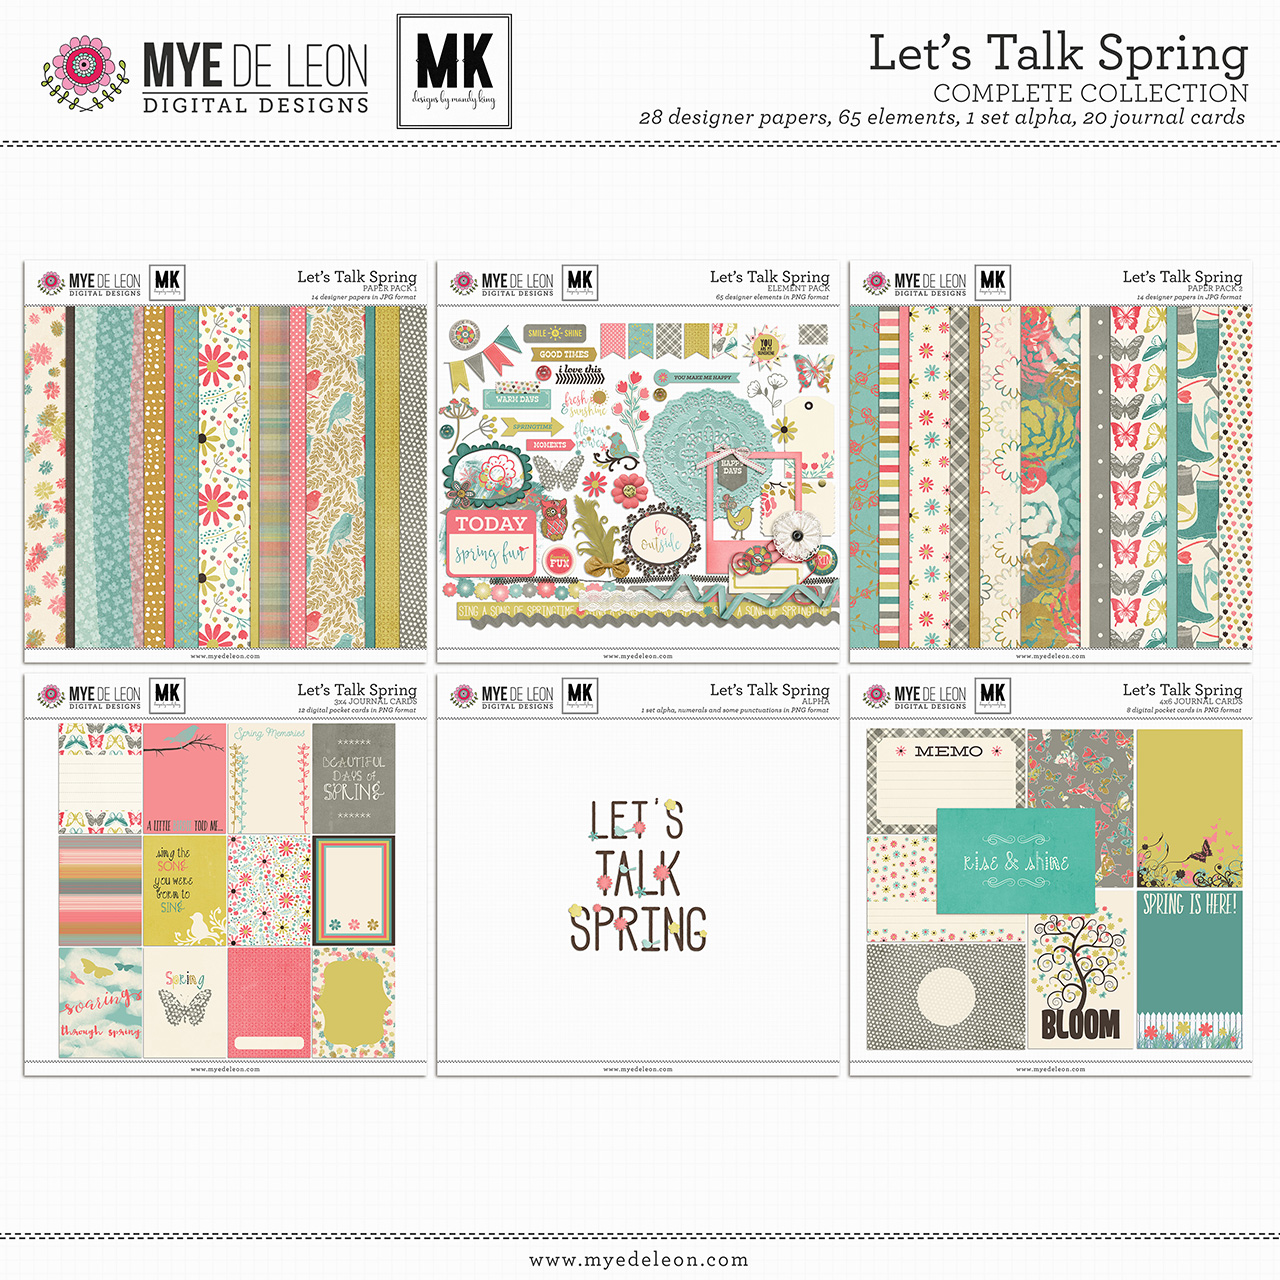 Let's Talk Spring | Complete Collection